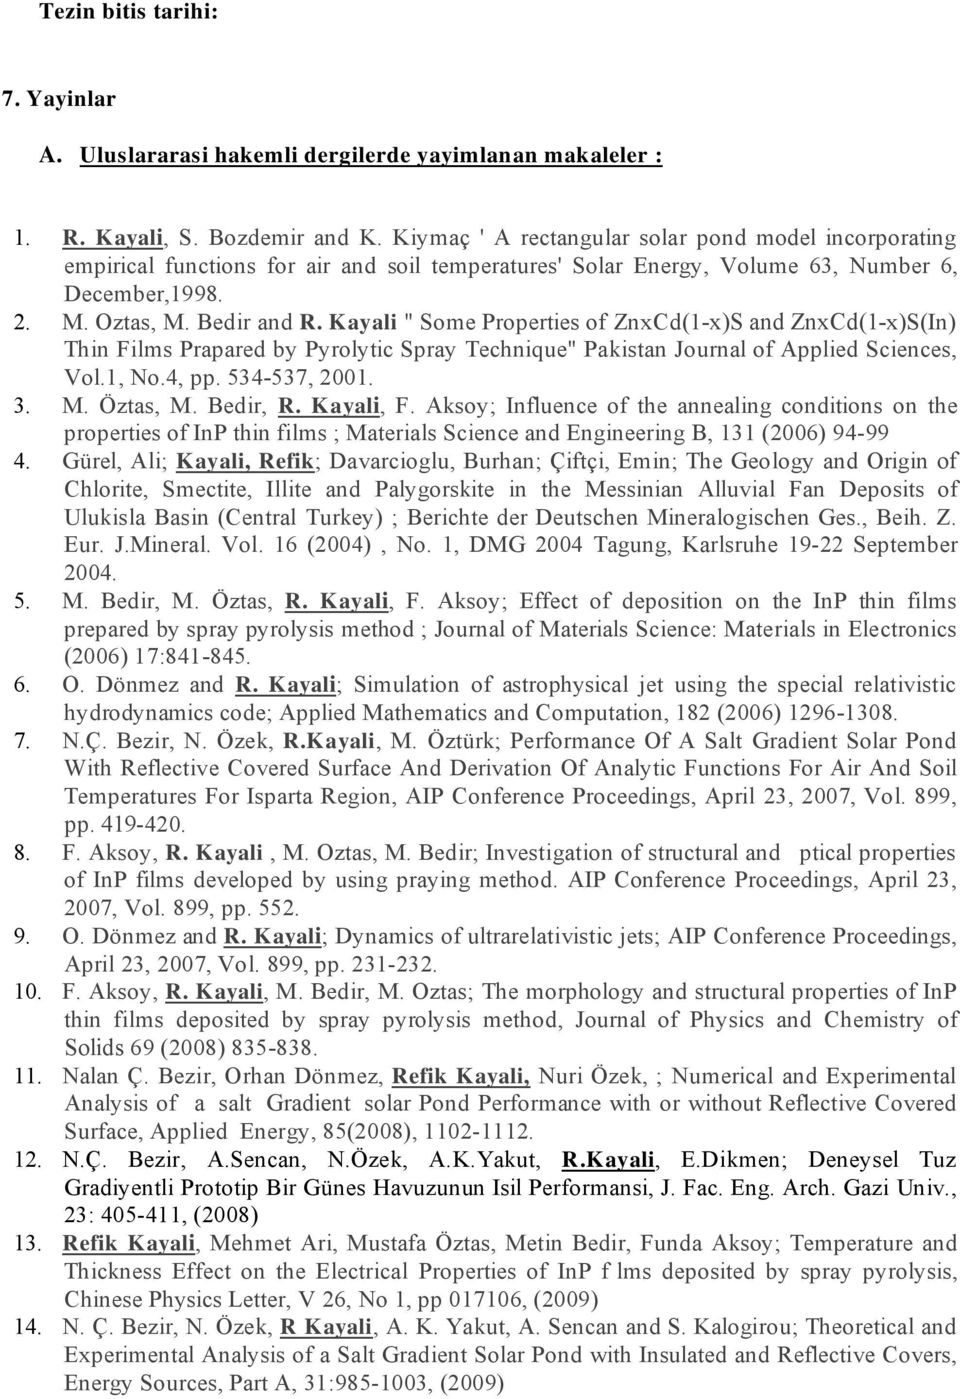 K ayali " Some Properties of ZnxCd(1-x)S and ZnxCd(1-x)S(In) Thin Films Prapared by Pyrolytic Spray Technique" Pakistan Journal of Applied Sciences, Vol.1, No.4, pp. 534-537, 2001. 3. M. Öztas, M.